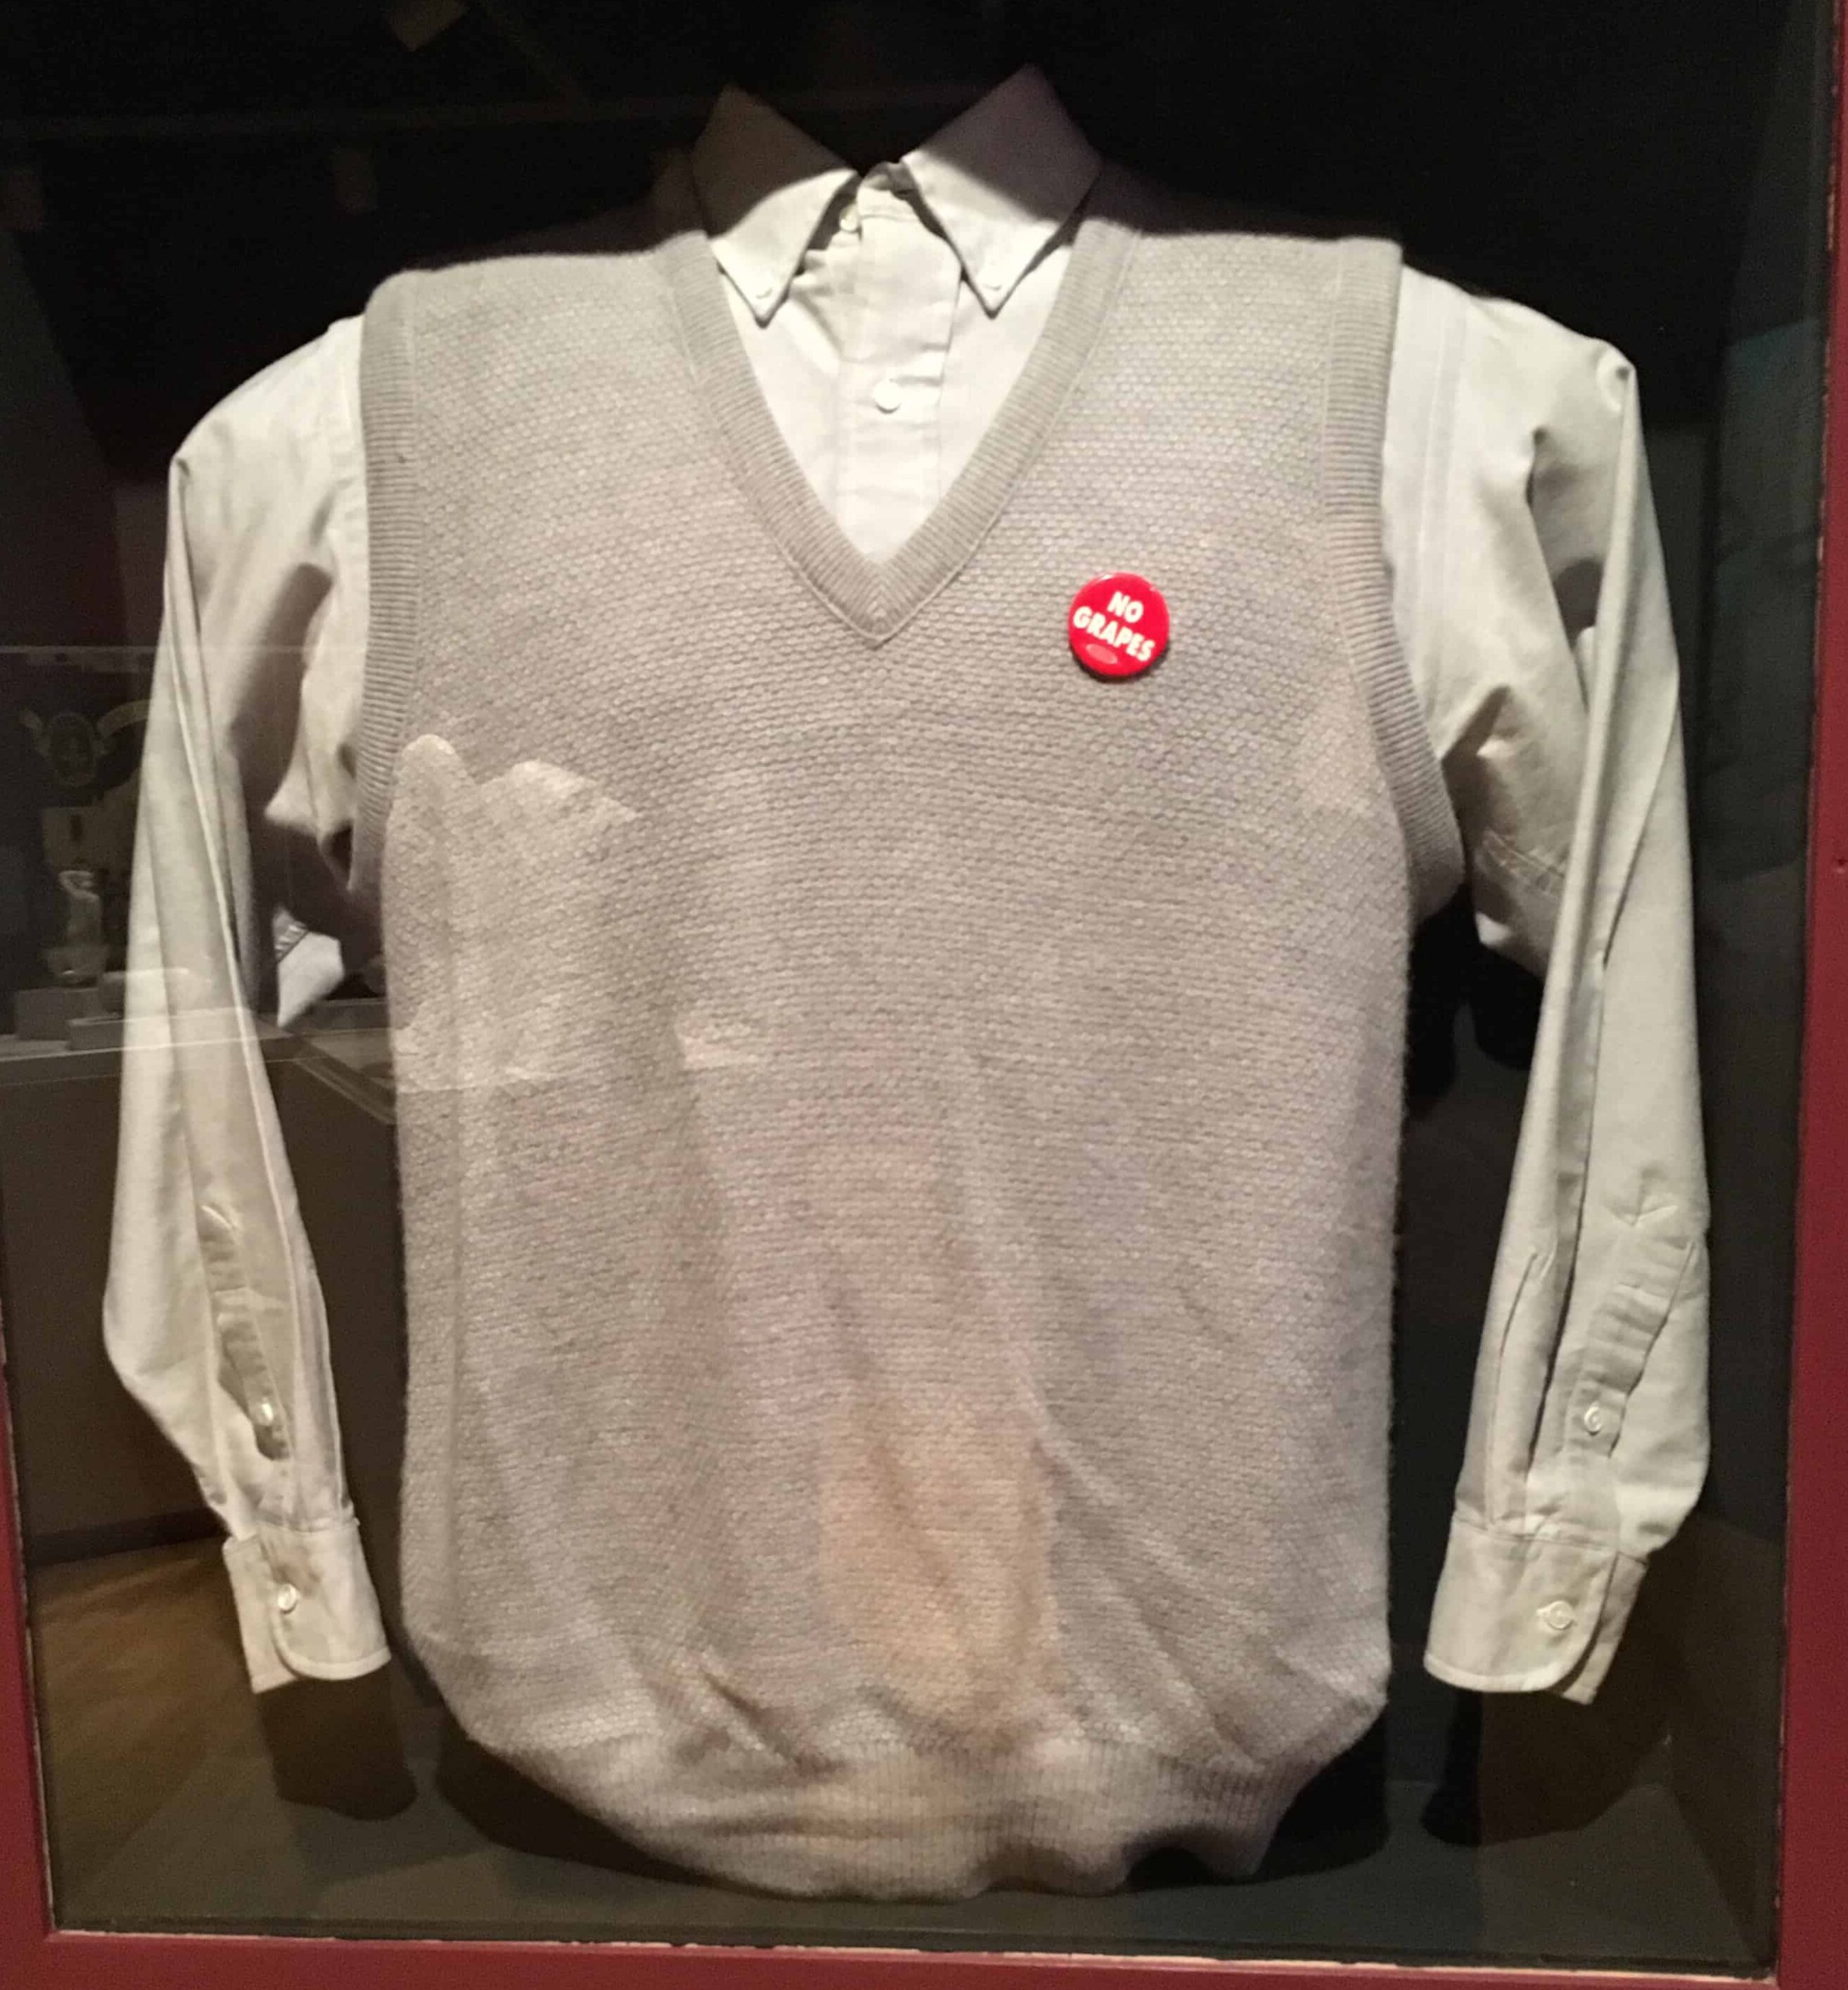 Shirt worn by César Chávez at National Museum of Mexican Art in Pilsen, Chicago, Illinois